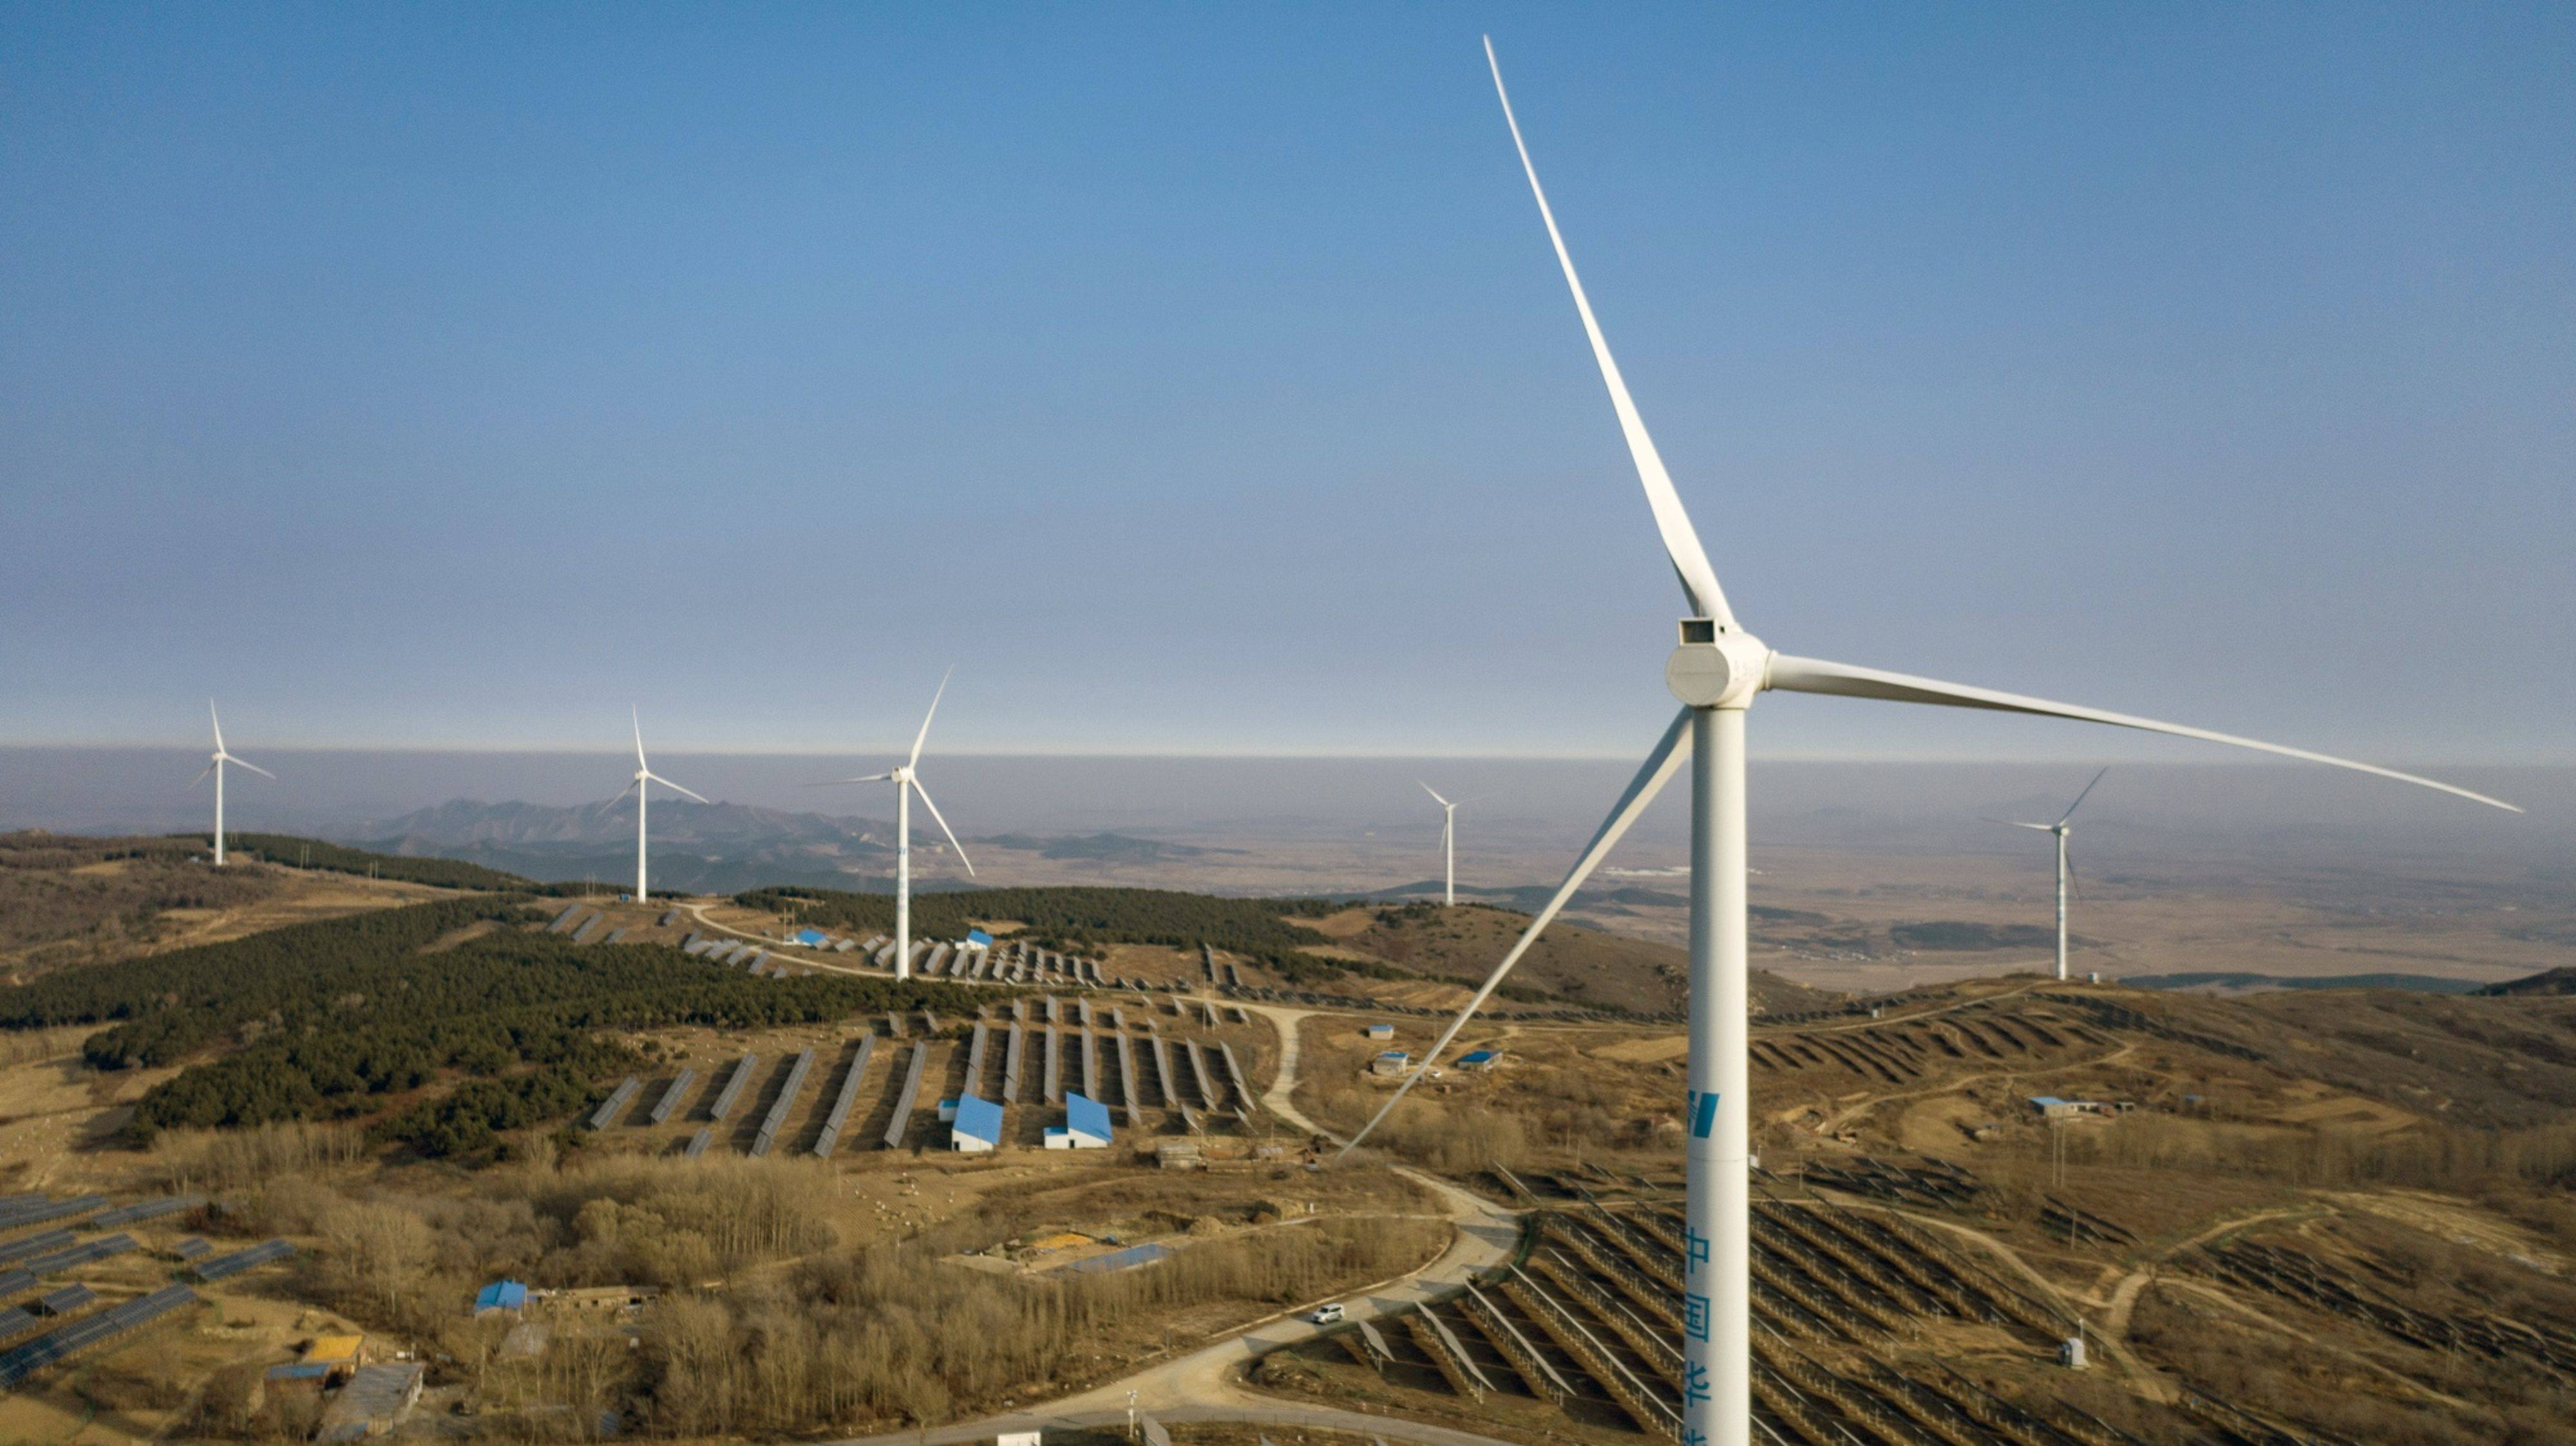 China has pledged to scale up its voluntary emissions target under the Paris climate agreement to achieve peak emissions before 2030, and become carbon neutral by 2060. Photo: Bloomberg